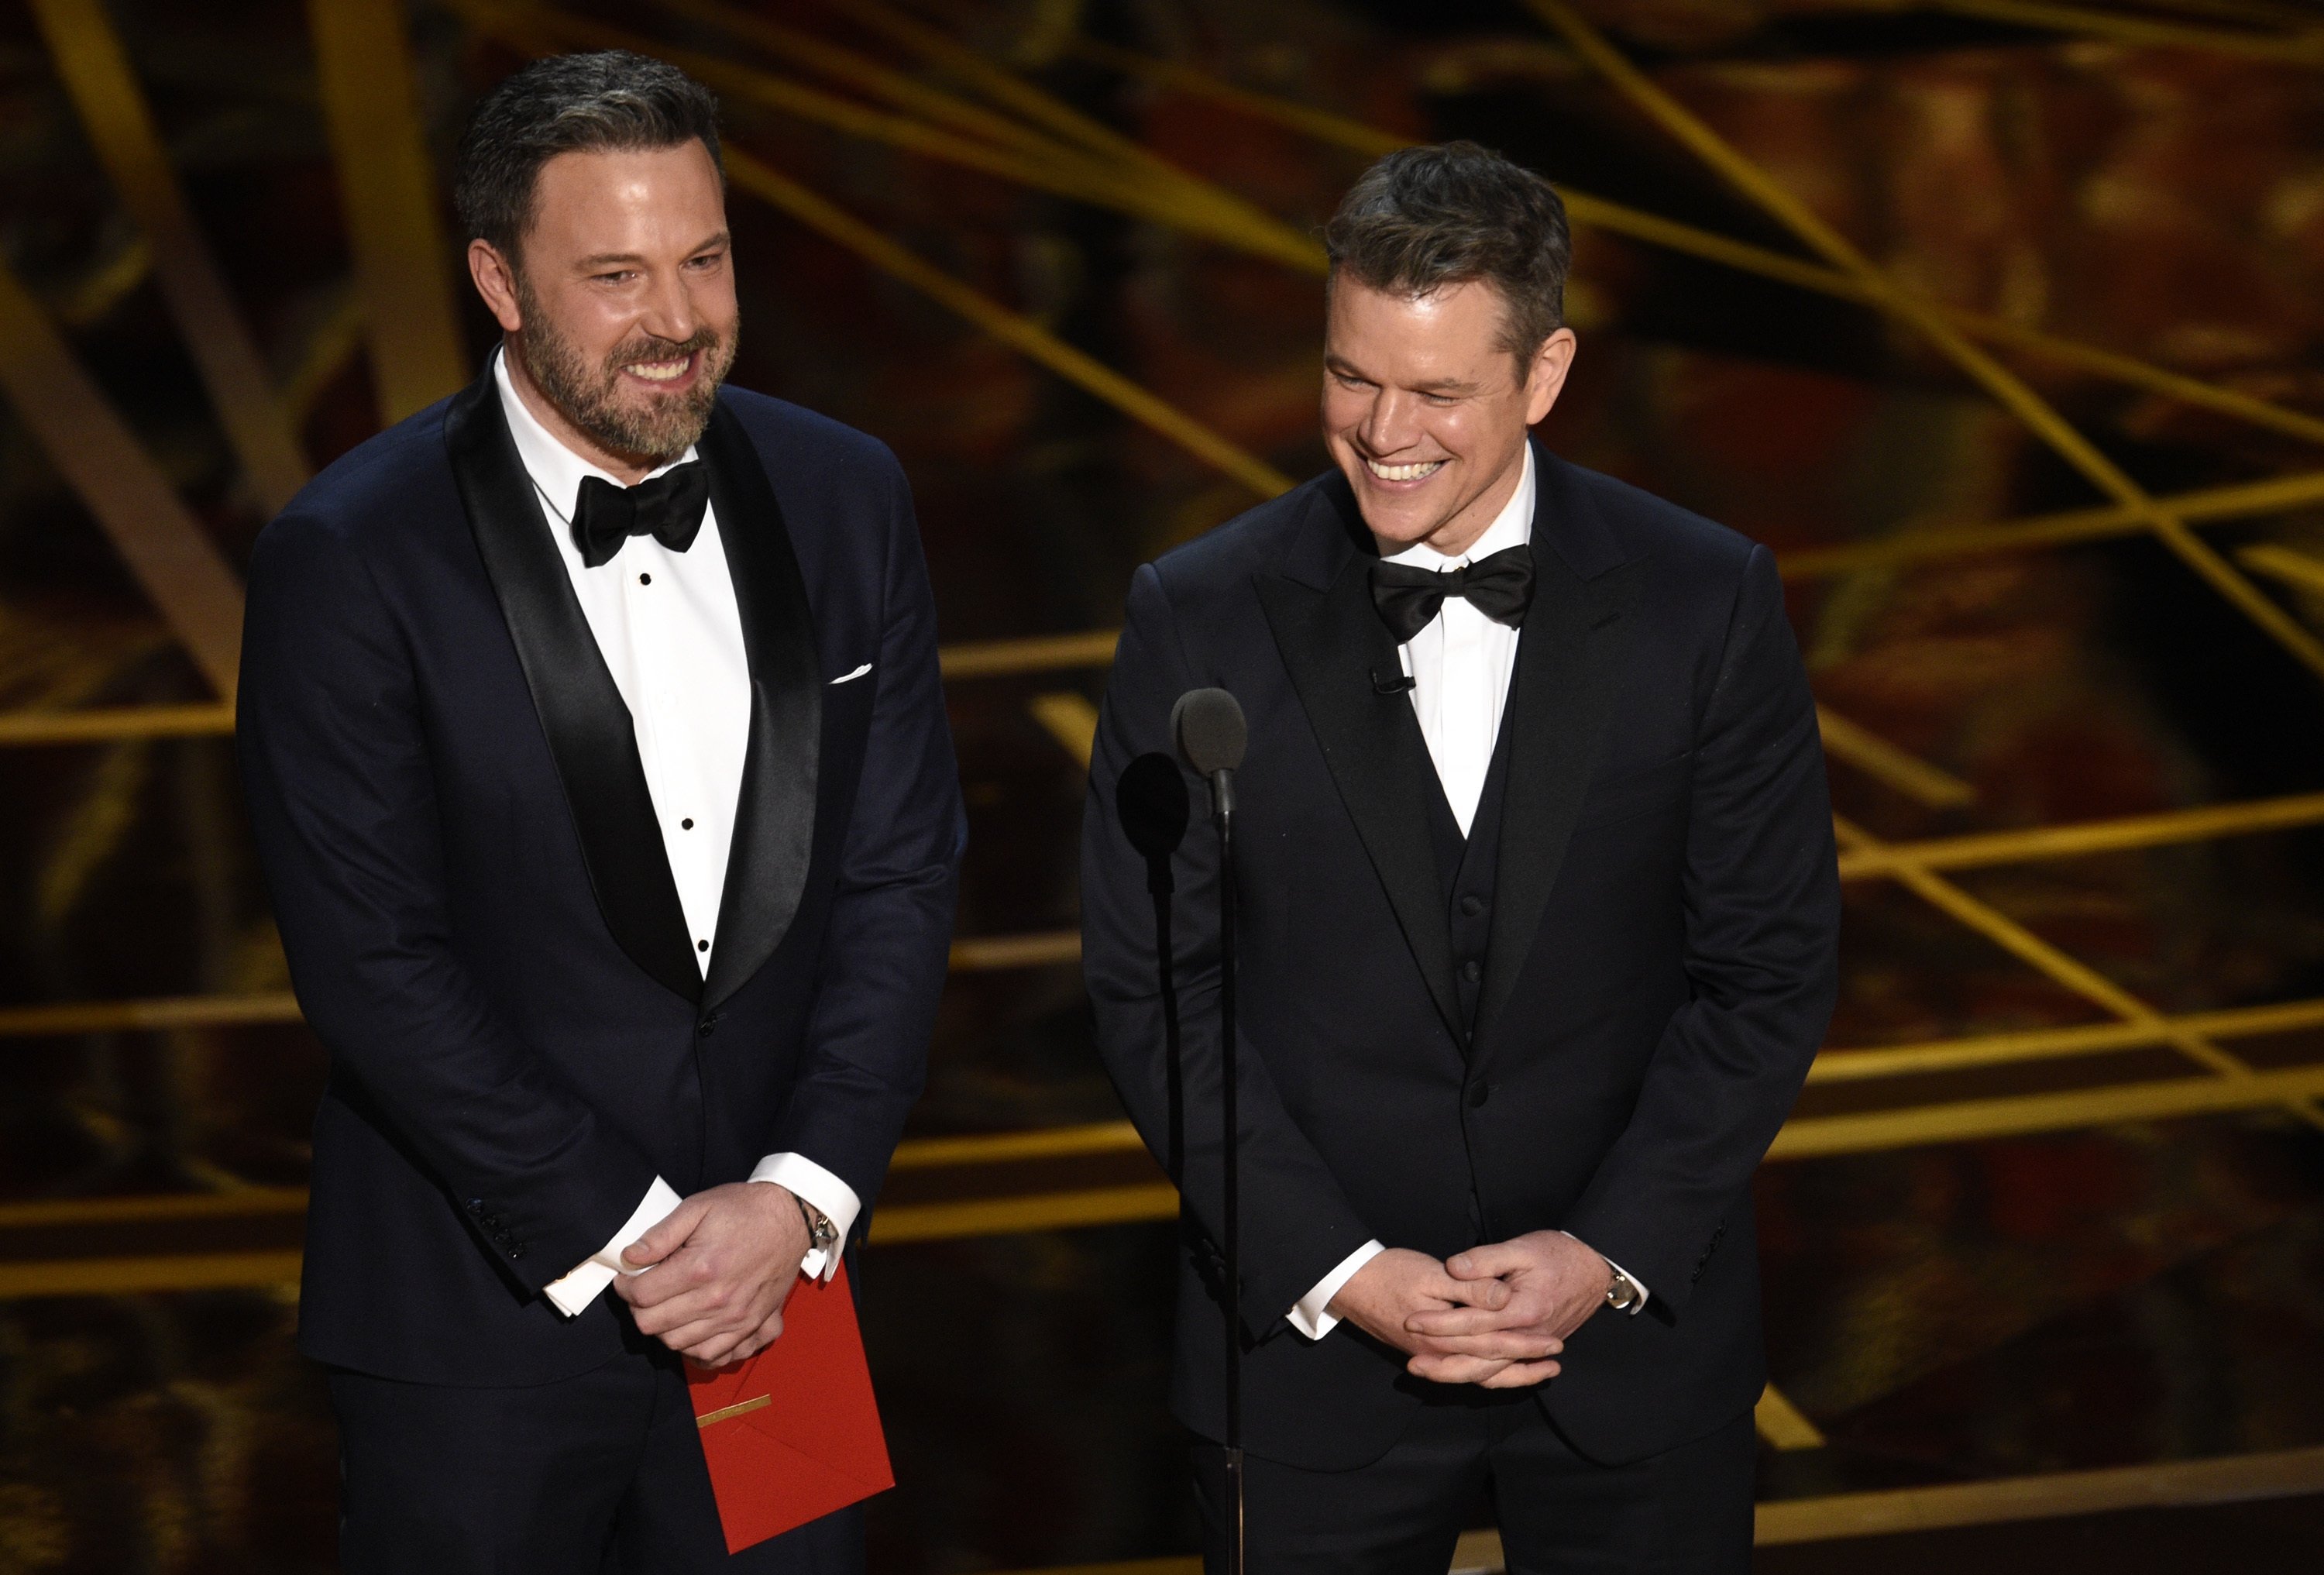 Ben Affleck (L) and Matt Damon present the award for best original screenplay at the Oscars at the Dolby Theatre in Los Angeles, California, U.S., Feb. 26, 2017. (AP Photo)